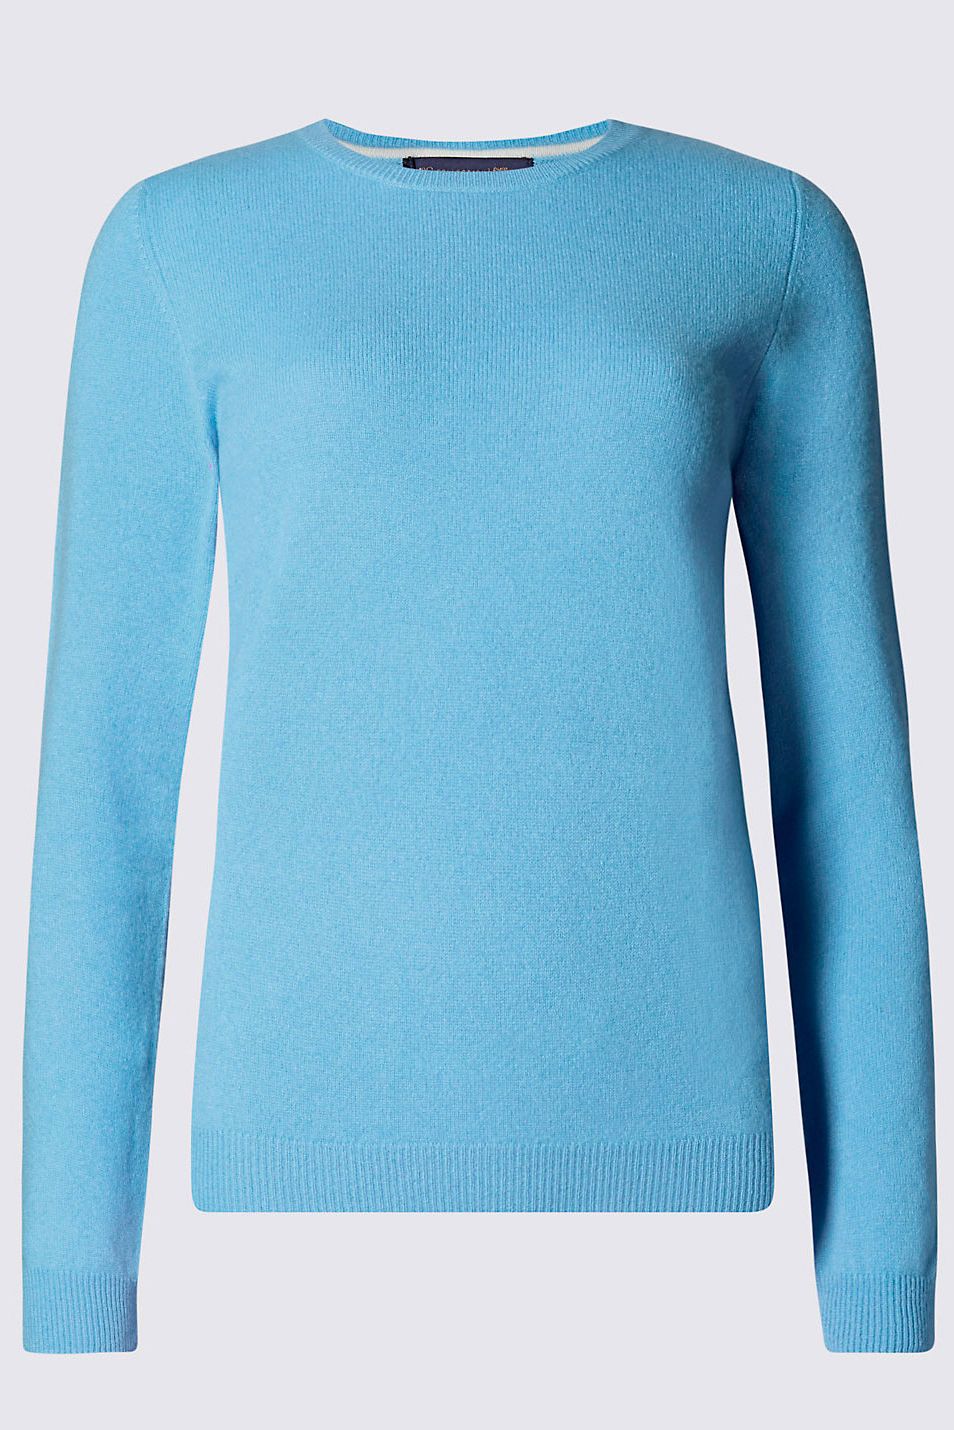 Blue, Product, Sleeve, Textile, Outerwear, Sweater, Teal, Aqua, Turquoise, Electric blue, 